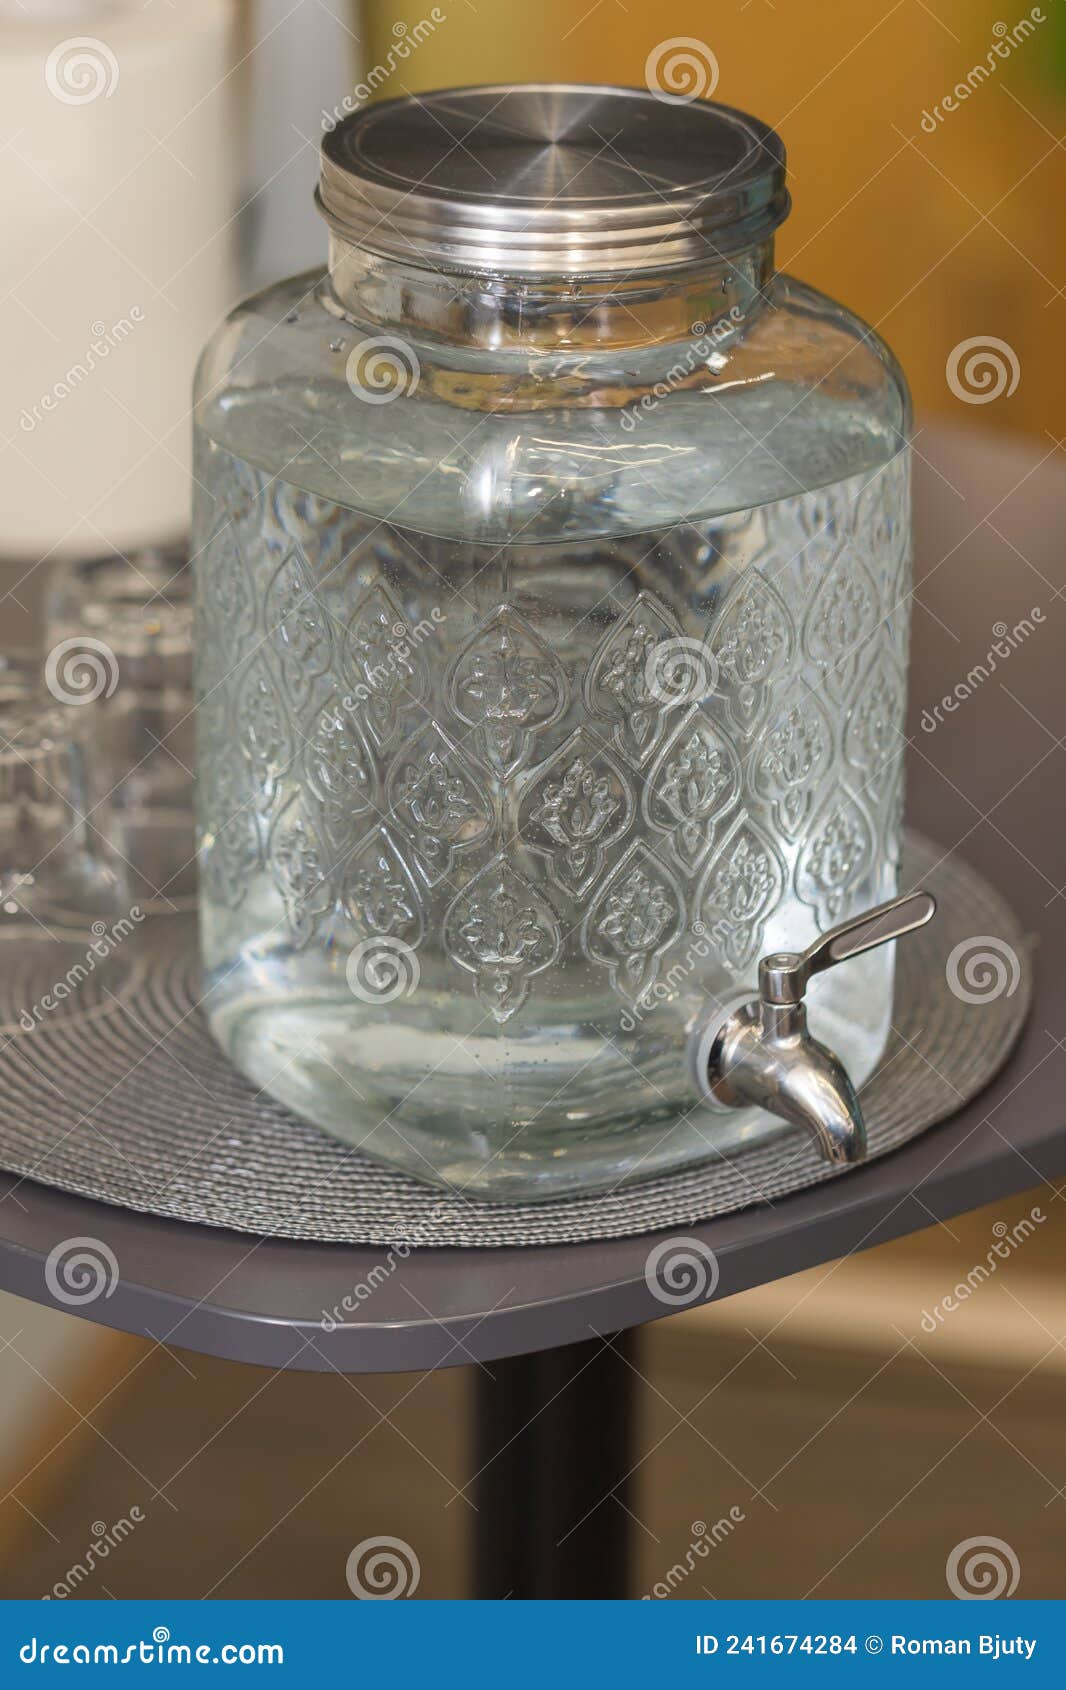 Homemade Glass Water Container Stands on the Table. the Container Has a  Water Tap Stock Photo - Image of lifestyle, glass: 241674284